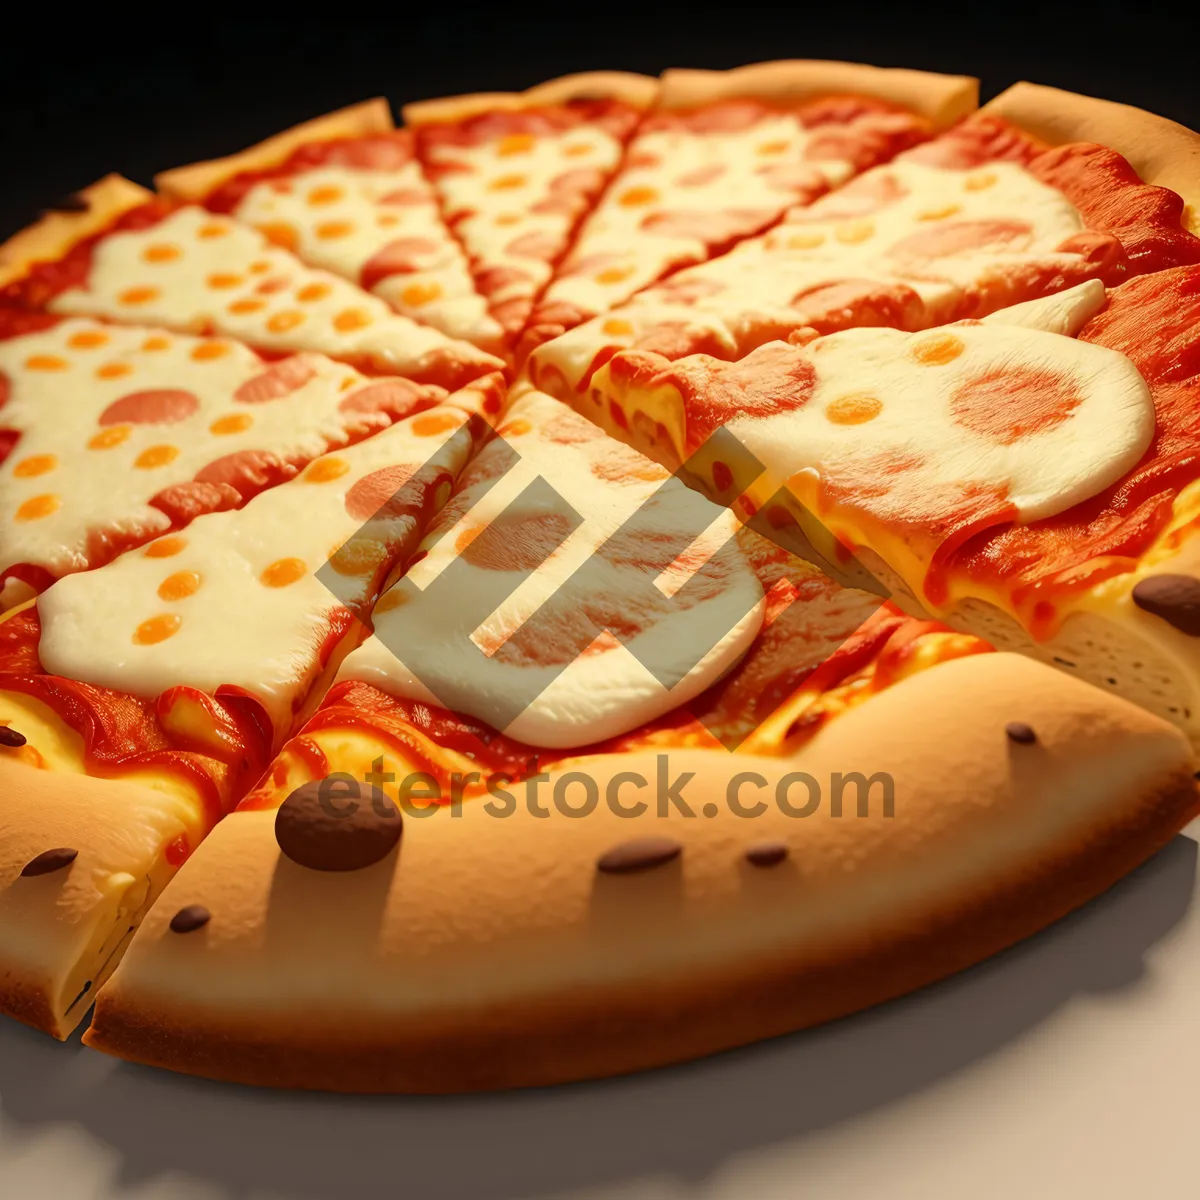 Picture of Delicious Gourmet Pizza Slice on Plate